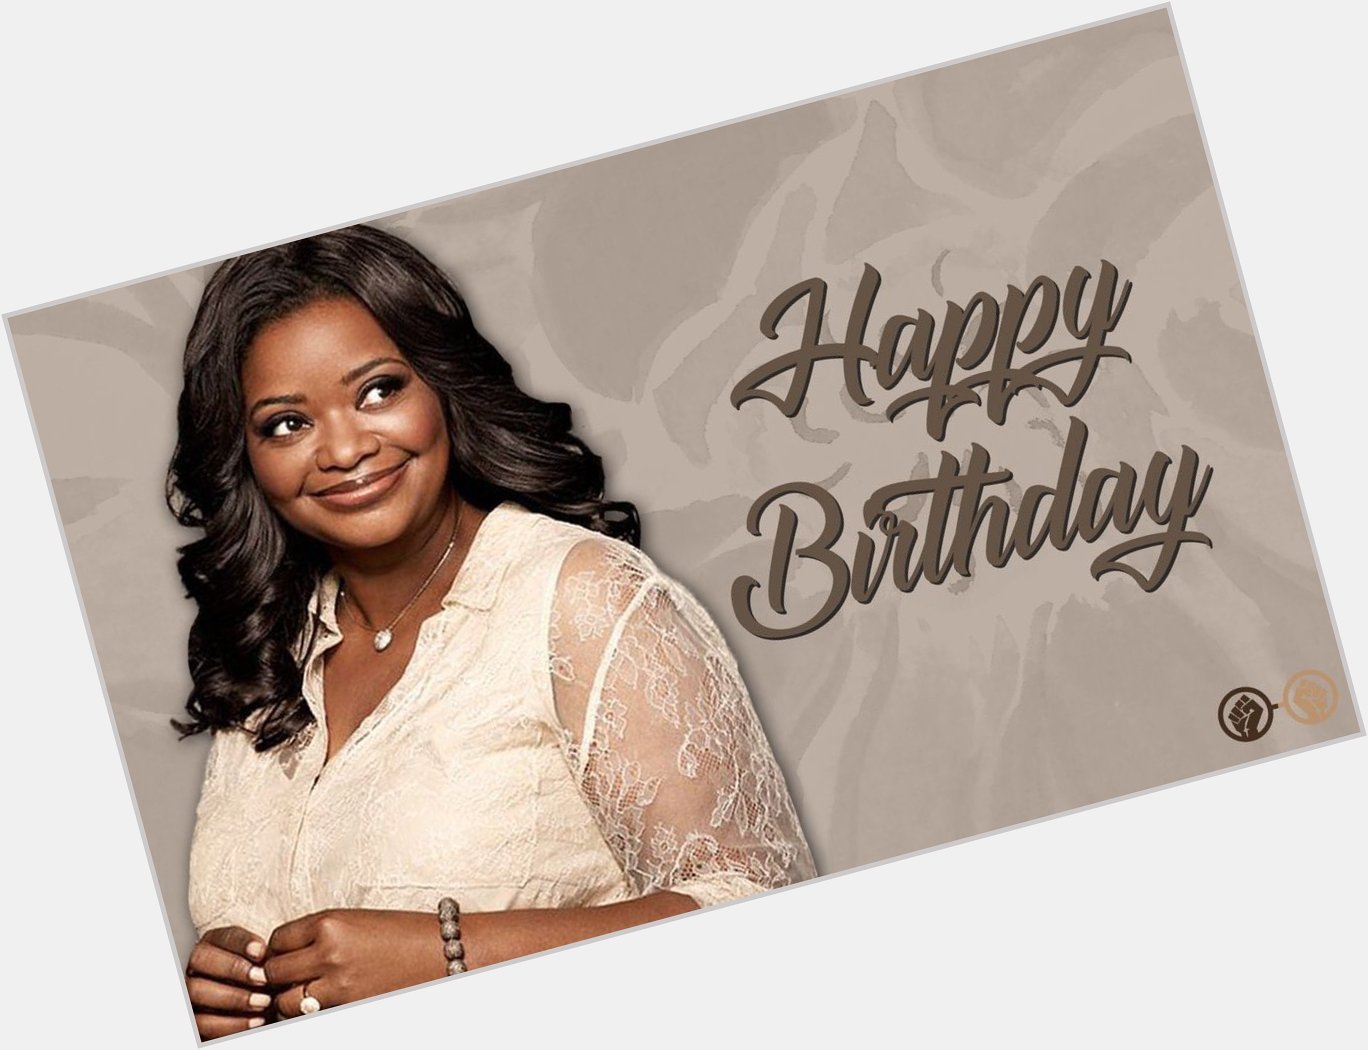 Wishing the wonderful Octavia Spencer a very happy birthday! The brilliant actress turns 46 today! 